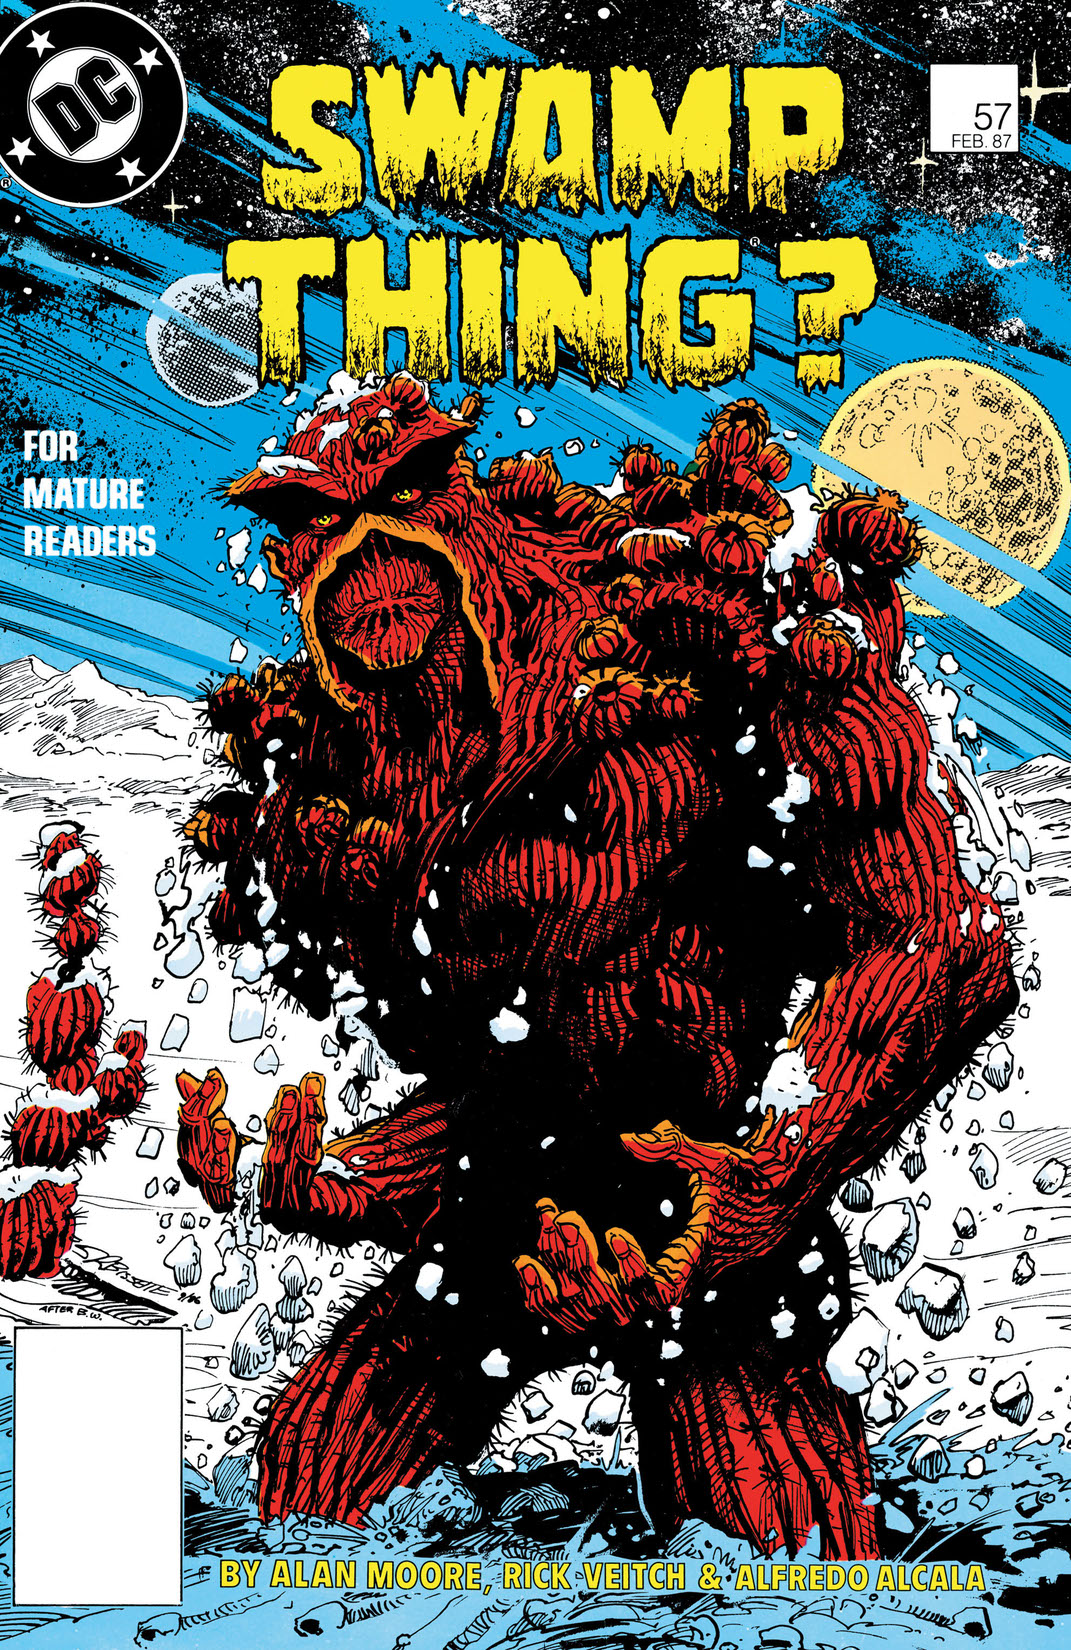 Swamp Thing (1985-) #57 preview images